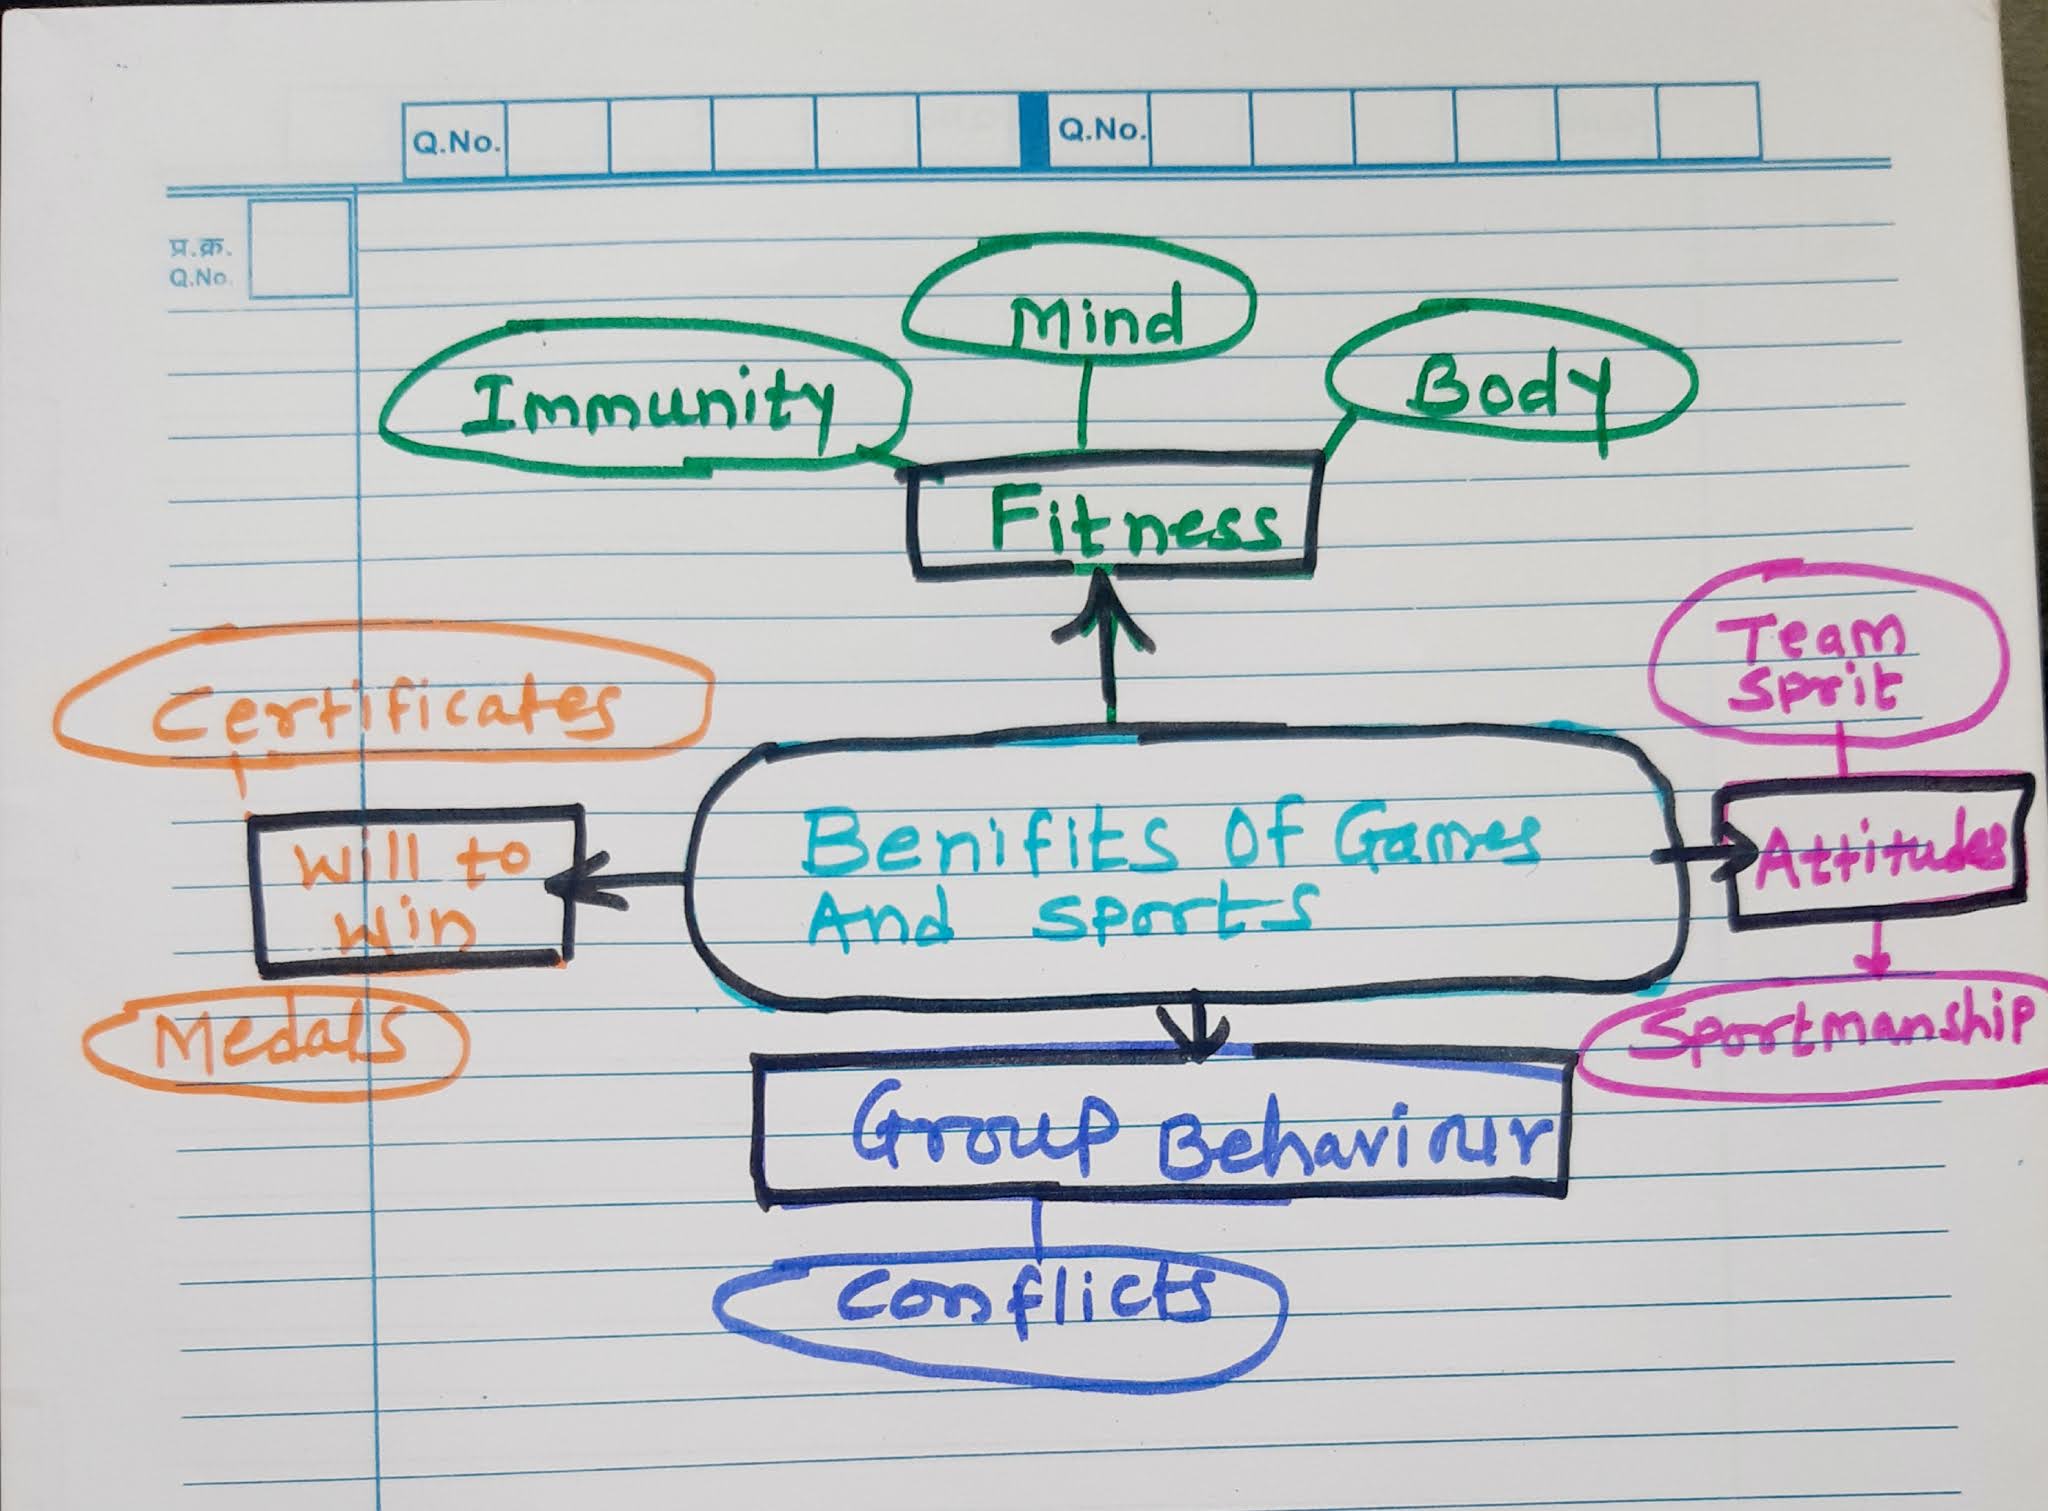 Benefits of games and sports mind mapping